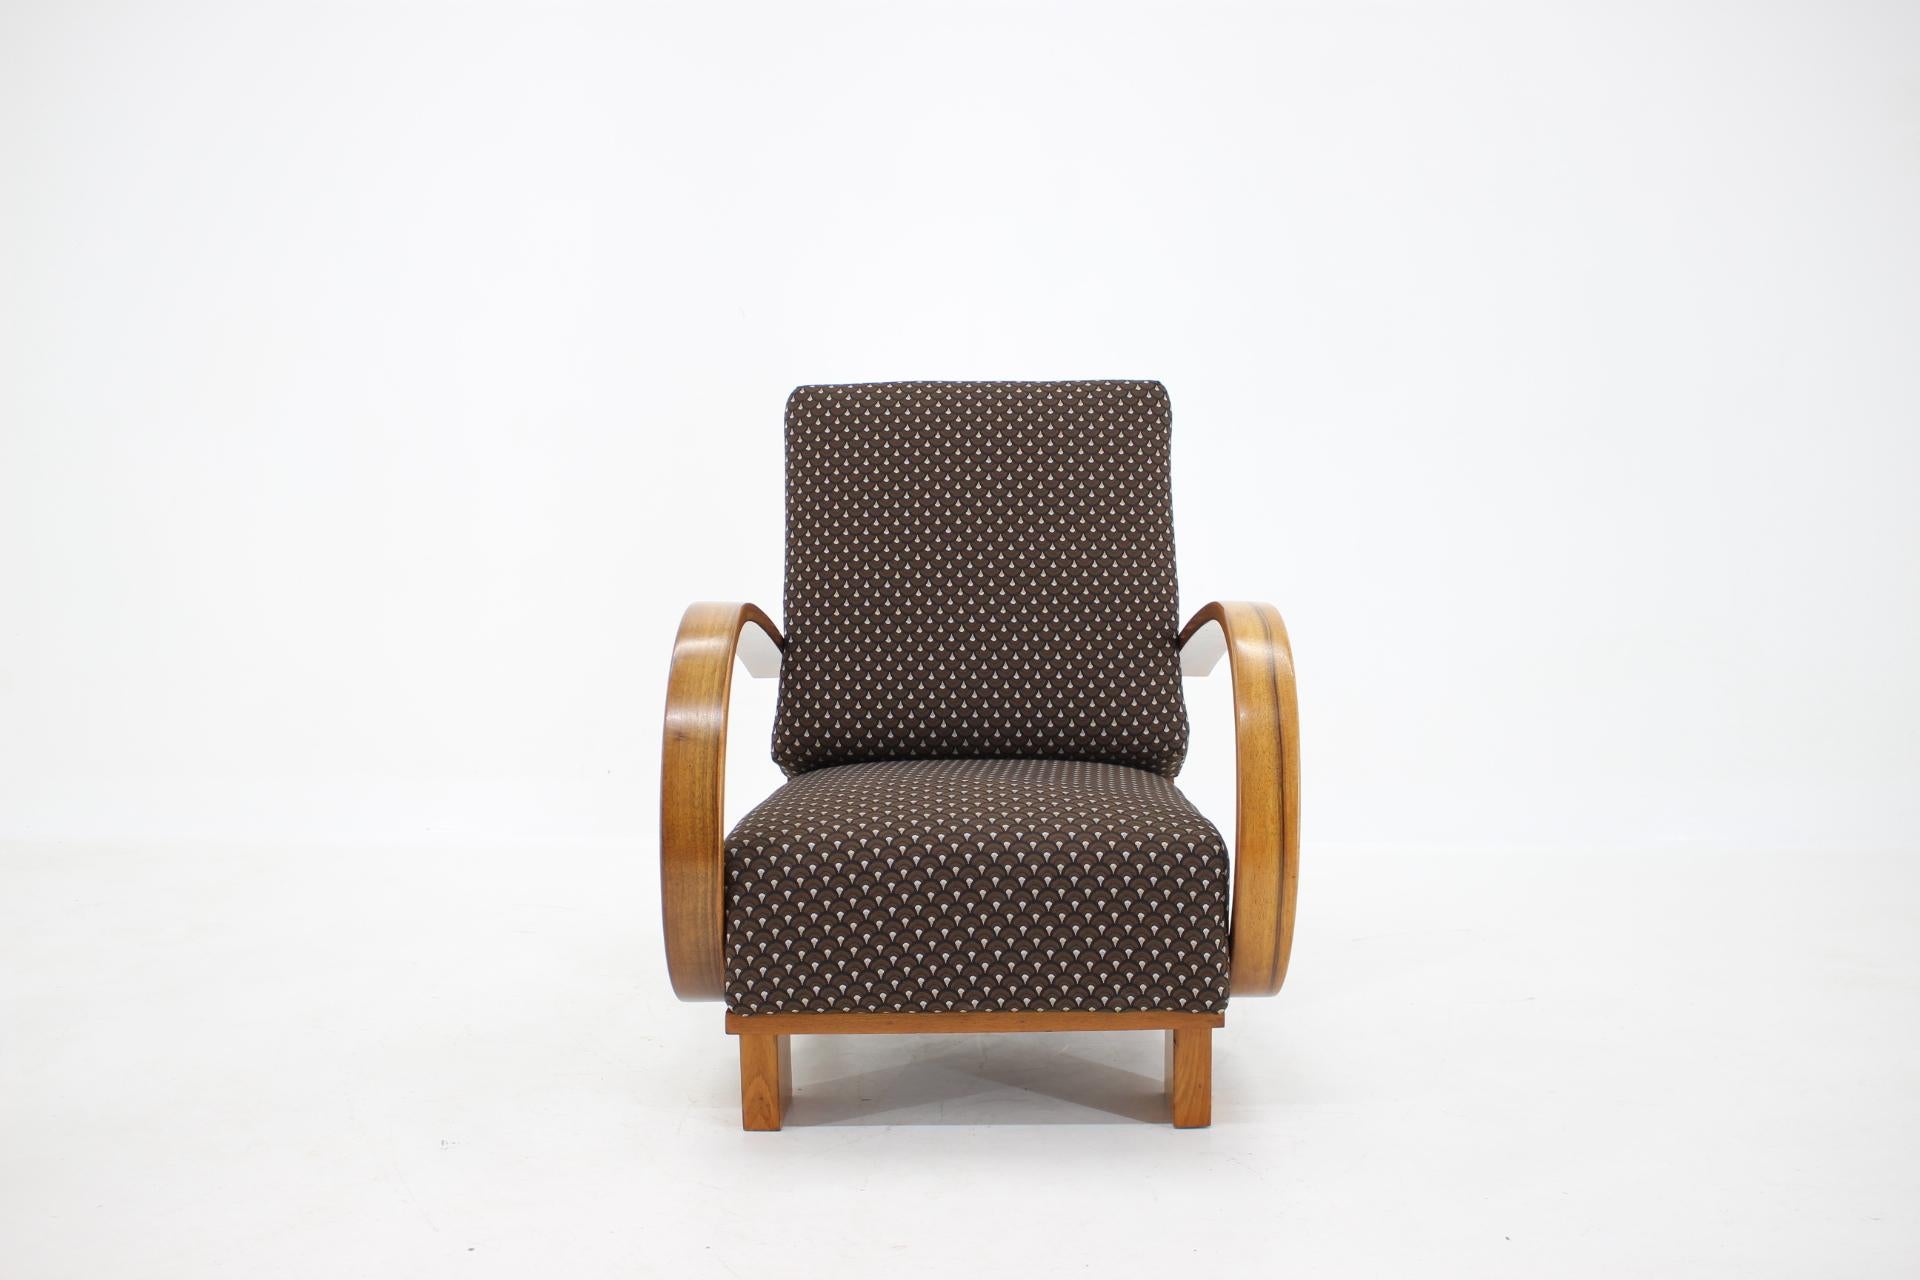 - Made of solid walnut
- Newly upholstered
- The wooden parts have been refurbished
- The seat height is 36cm.